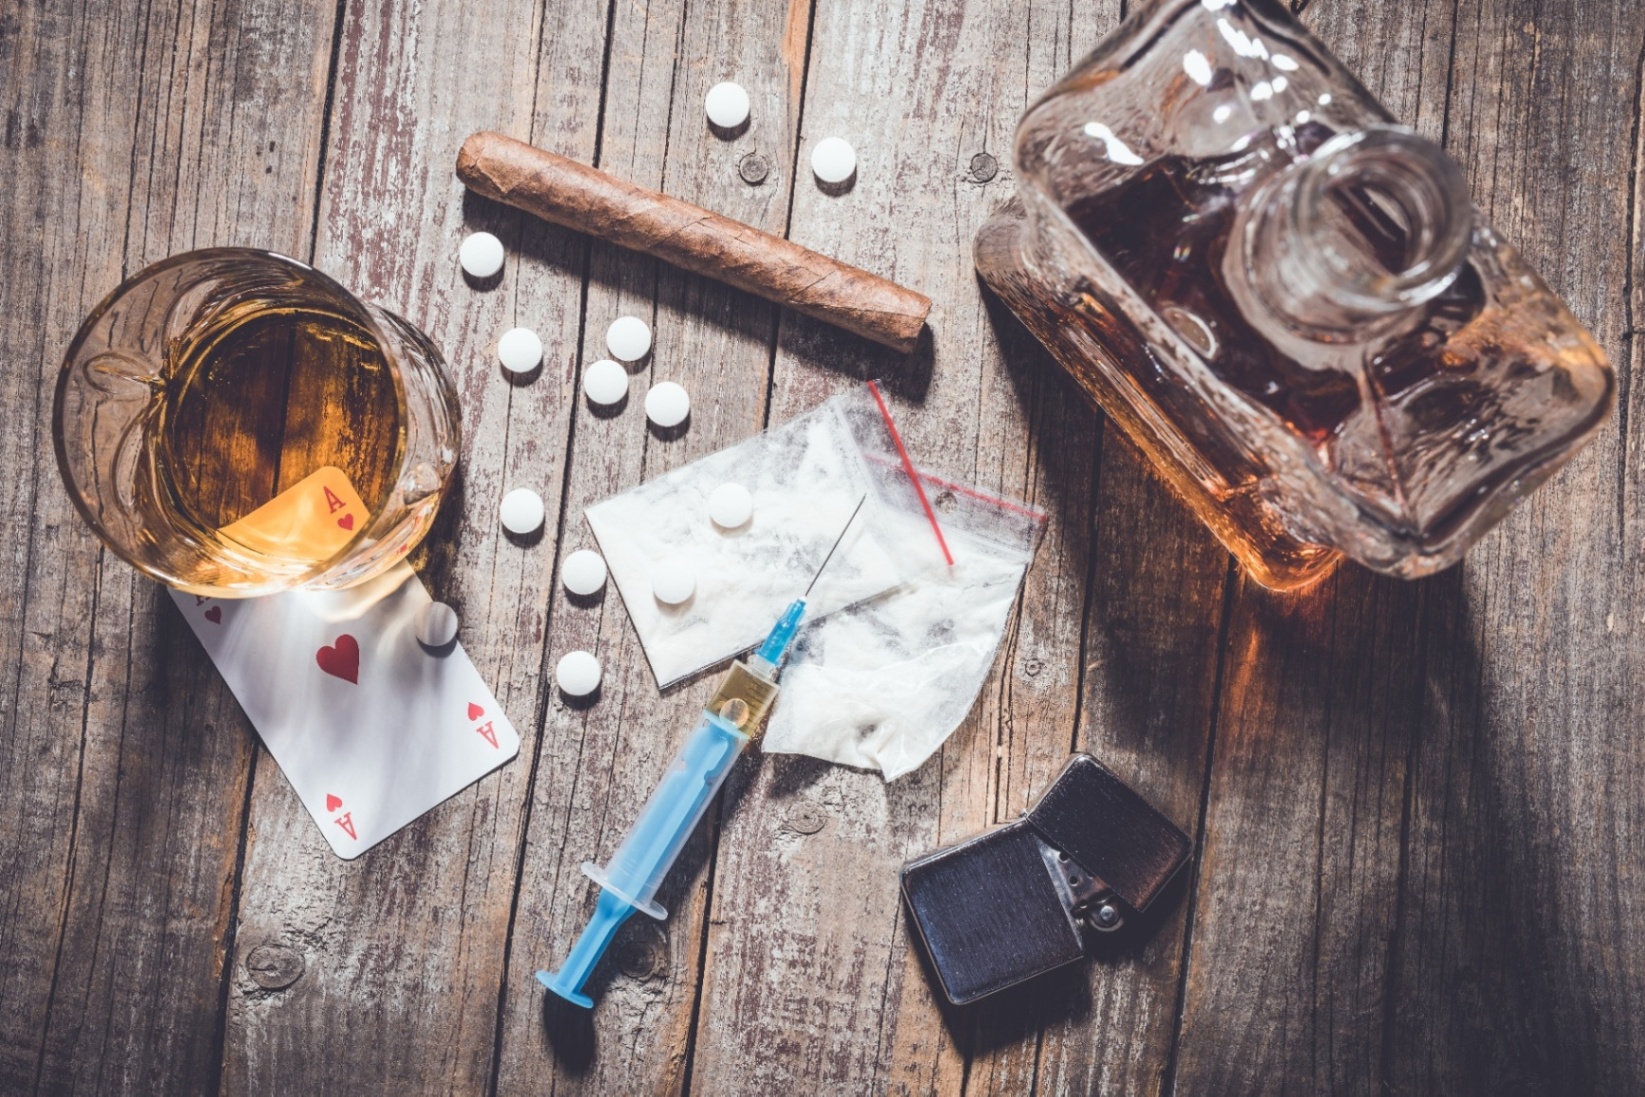 A top down view of drugs and alcohol of different kinds, representing the stress substance abuse counseling in Palm Beach, FL can address. Learn more about substance abuse counseling in Delray Beach, FL by contacting a substance abuse counselor in Palm Beach, FL today.